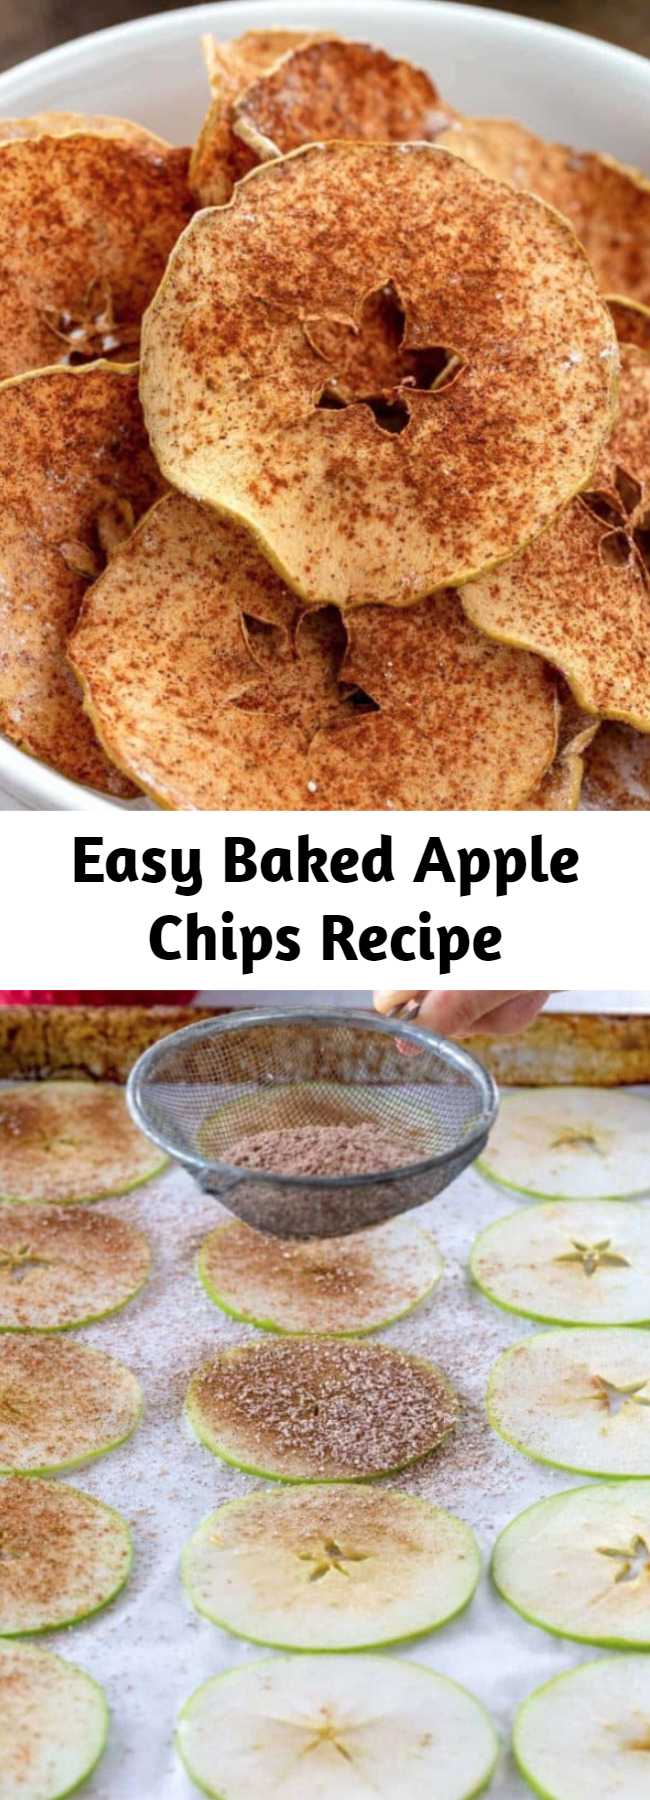 Easy Baked Apple Chips Recipe - Chose your favorite apple variety to make these simple and healthy baked cinnamon apple chips! Cinnamon enhances the flavor while cutting the apples into thin slices, and baking at a low oven temperature for a few hours ensures super crispy chips. These crisp apple chips are delicious and addicting, without the guilt!